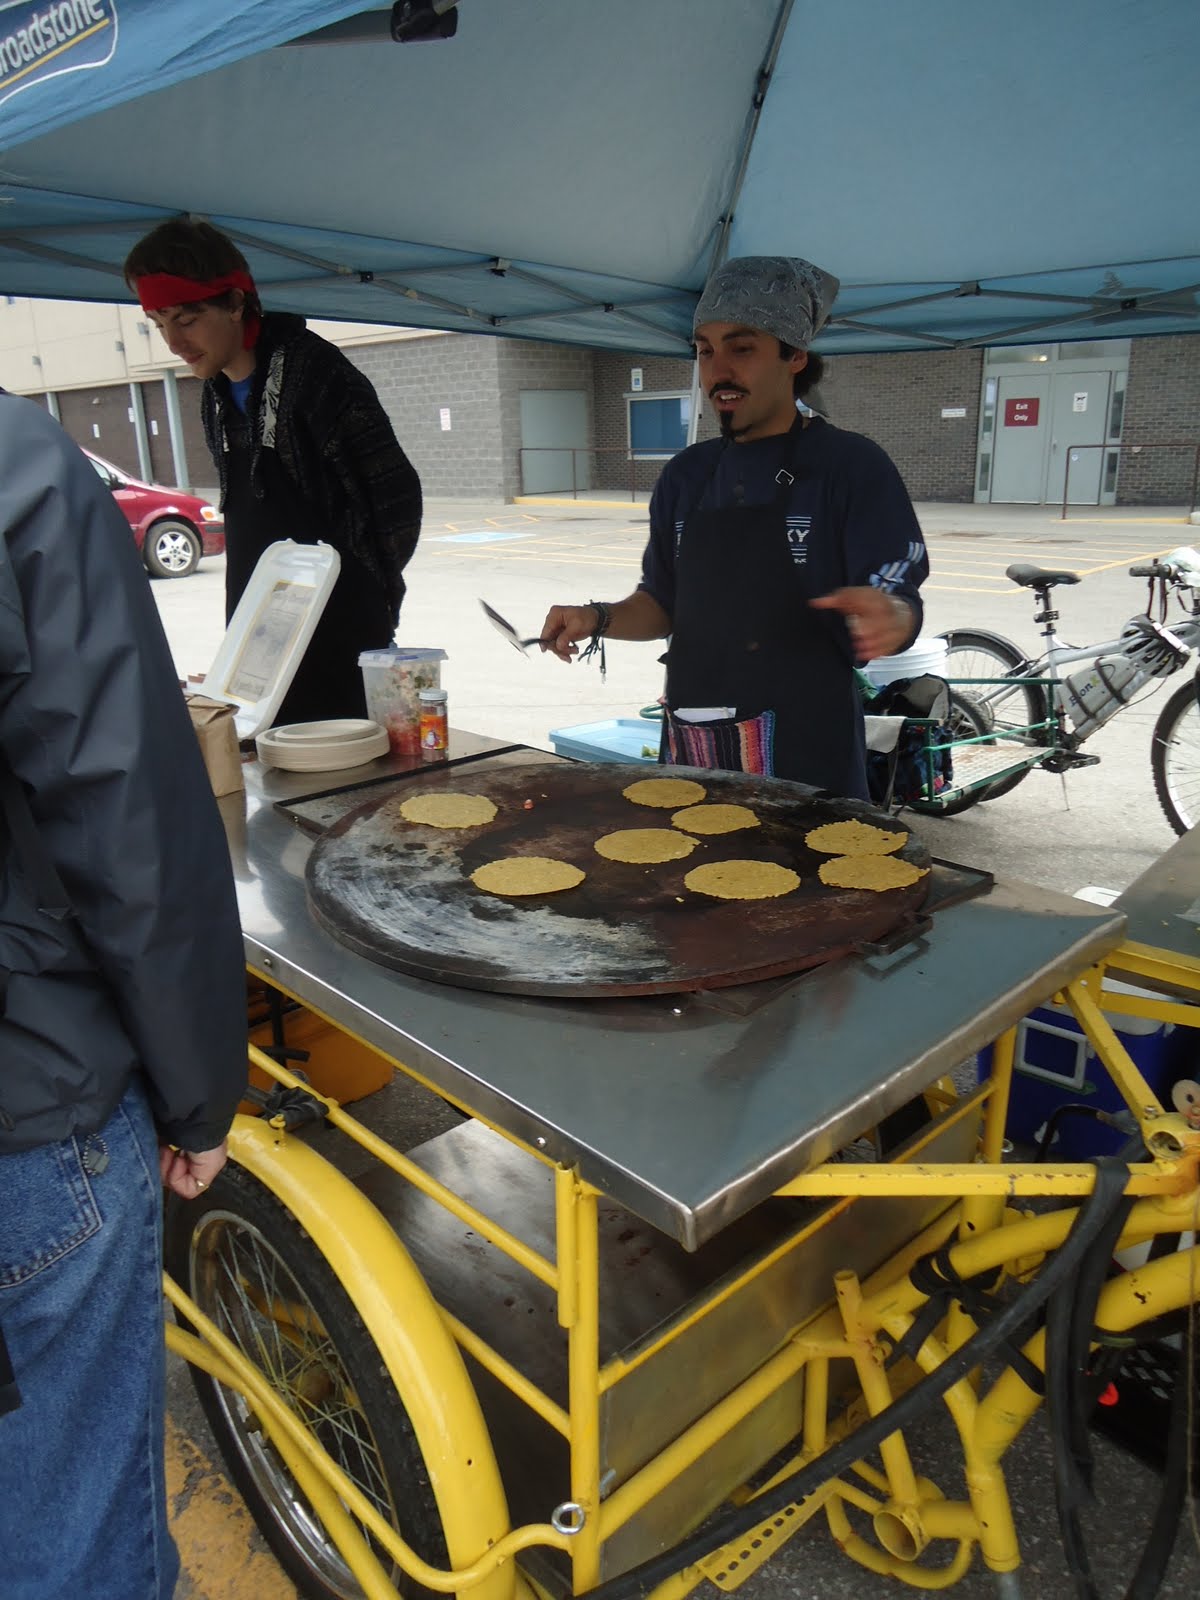 Bicycle-Powered Authentic Corn Tortillas